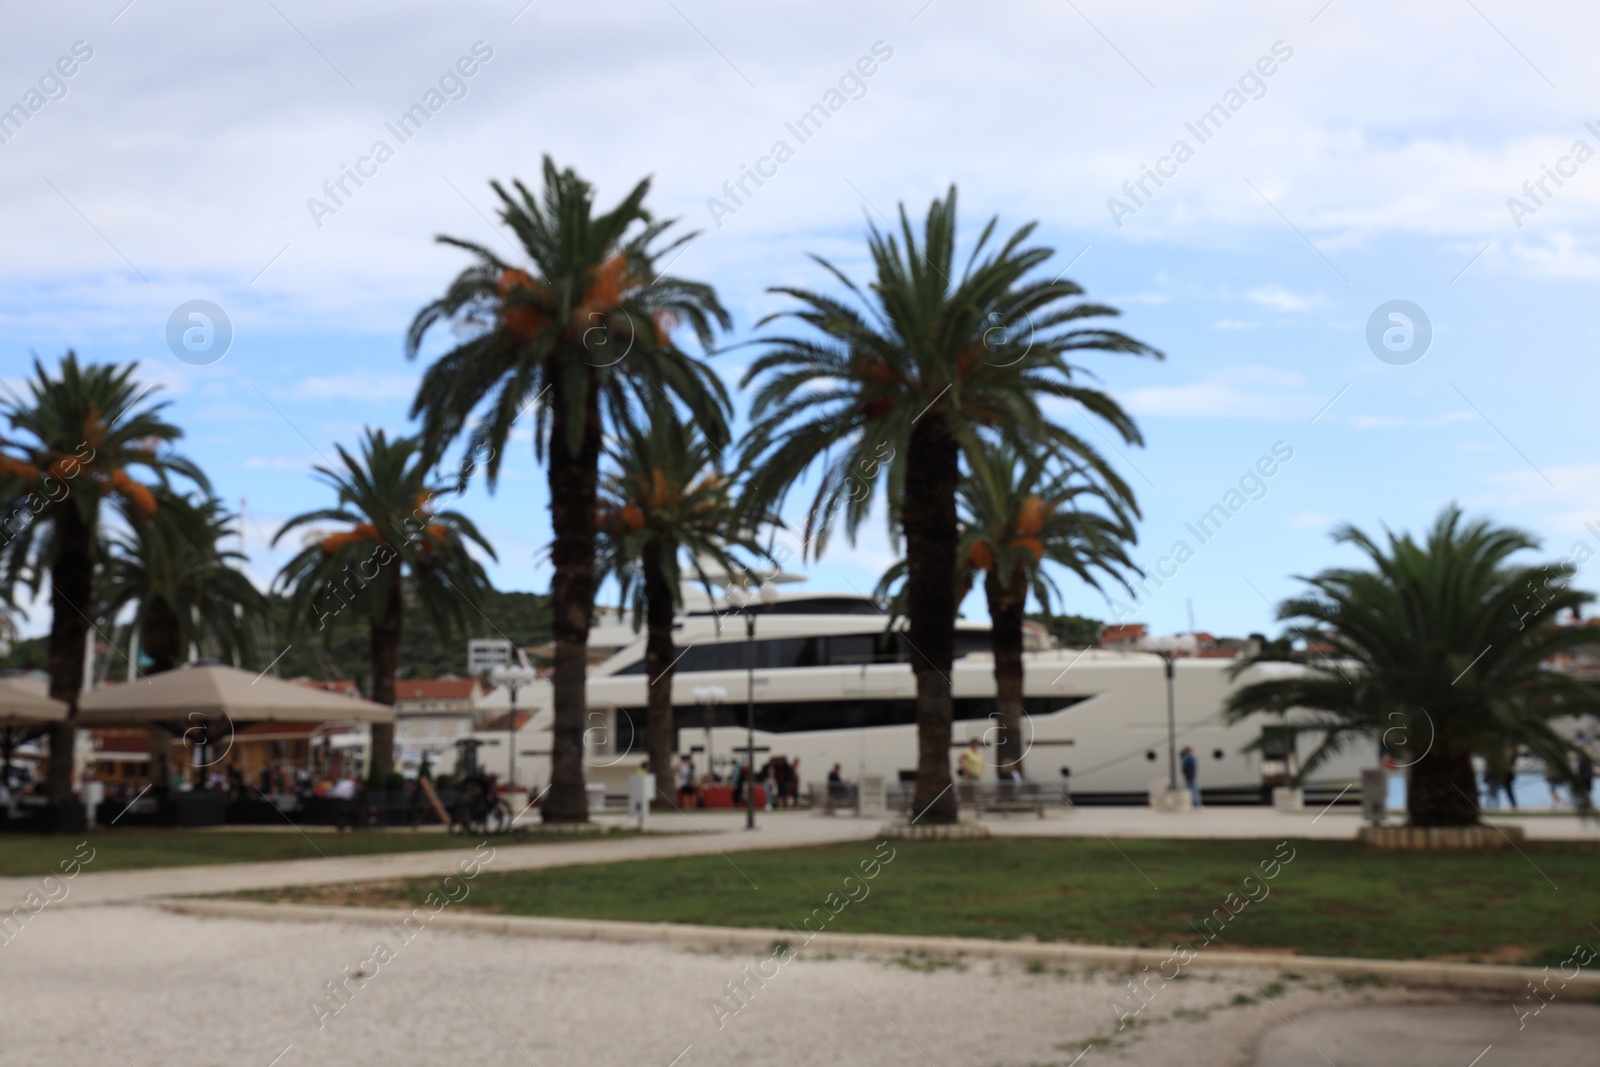 Photo of Blurred view of palm trees and moored ferry boat on cloudy day